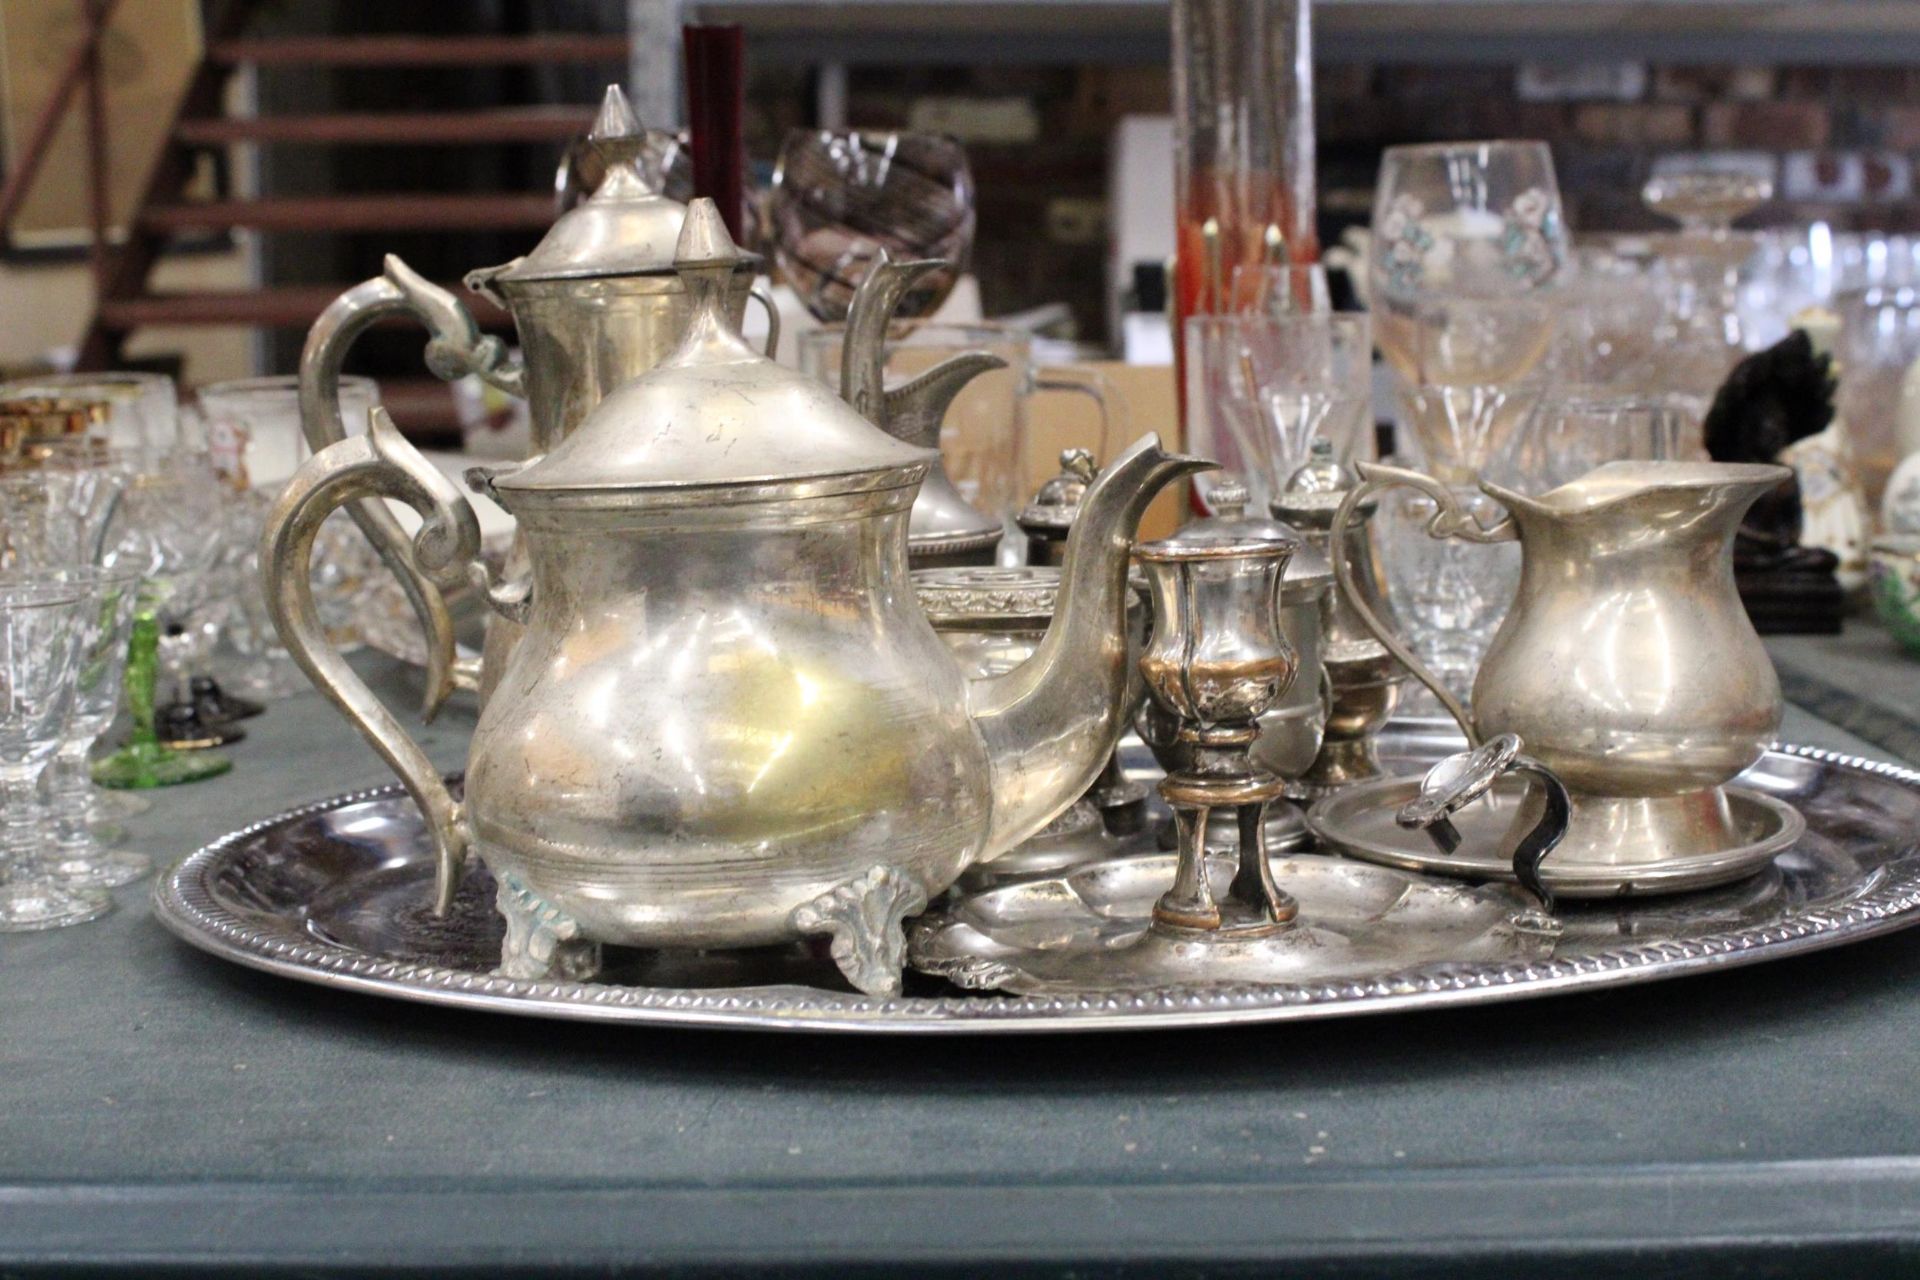 A QUANTITY OF SILVER PLATED ITEMS TO INCLUDE, A TRAY, TEAPOT, COFFEE POT, CANDLESTICK, JUGS, A CRUET - Image 6 of 6